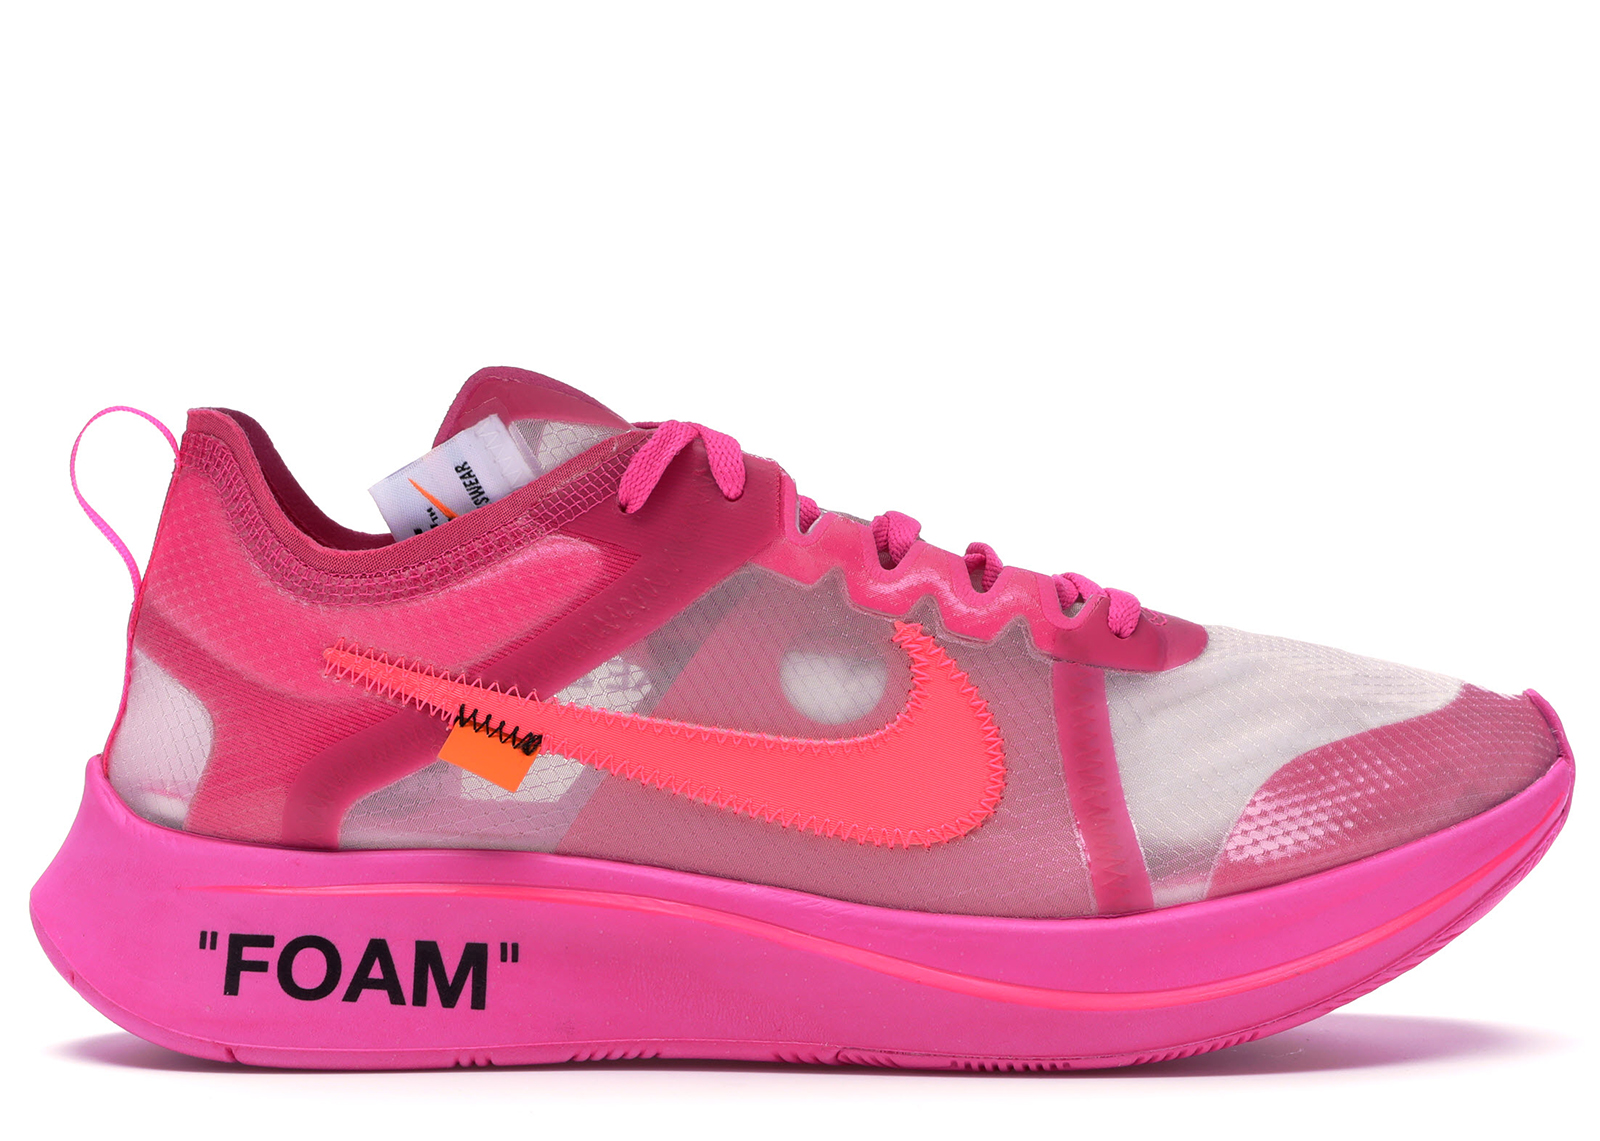 Nike Zoom Fly Off-White Pink - AJ4588-600 - US